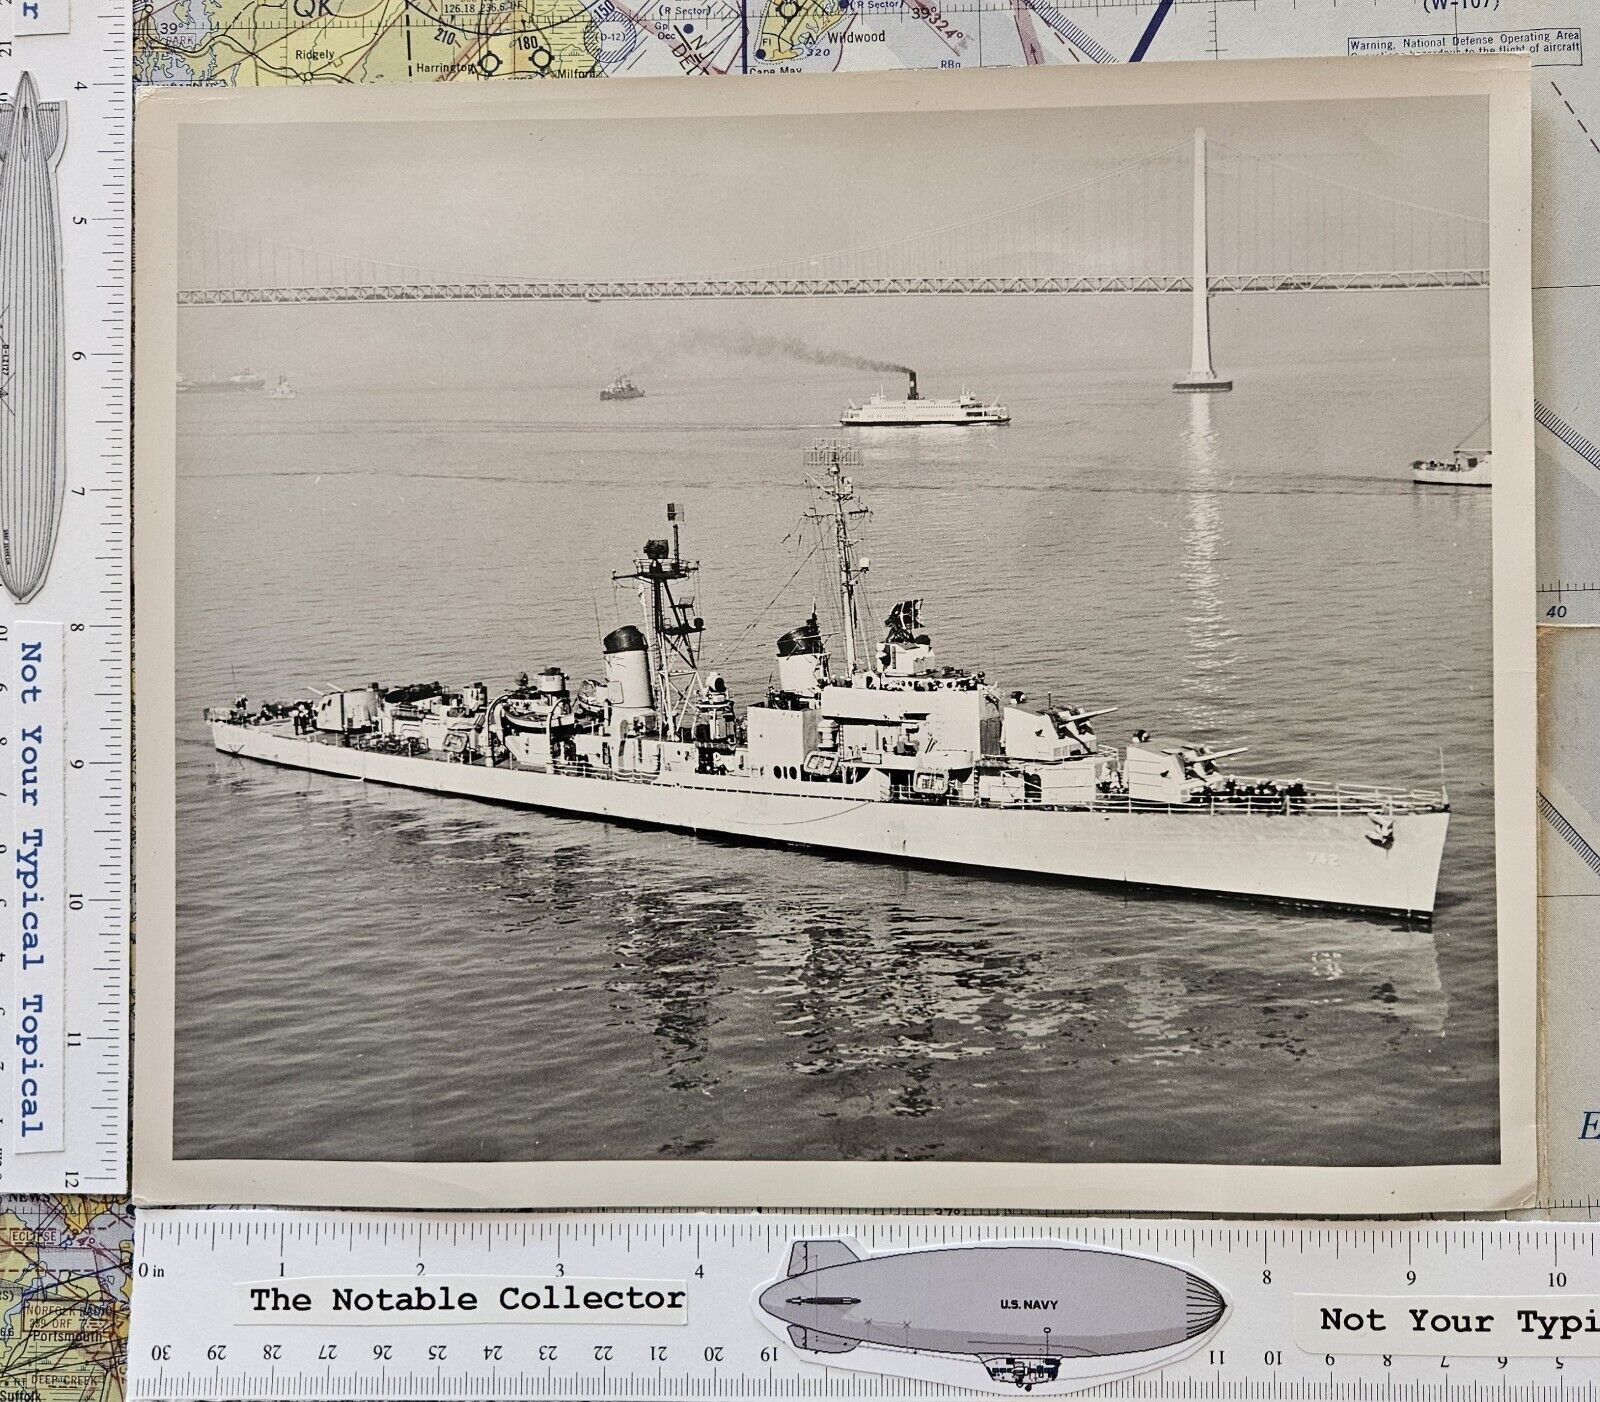 B/W Photo of USS Frank Knox Destroyer from the William T Larking Collection